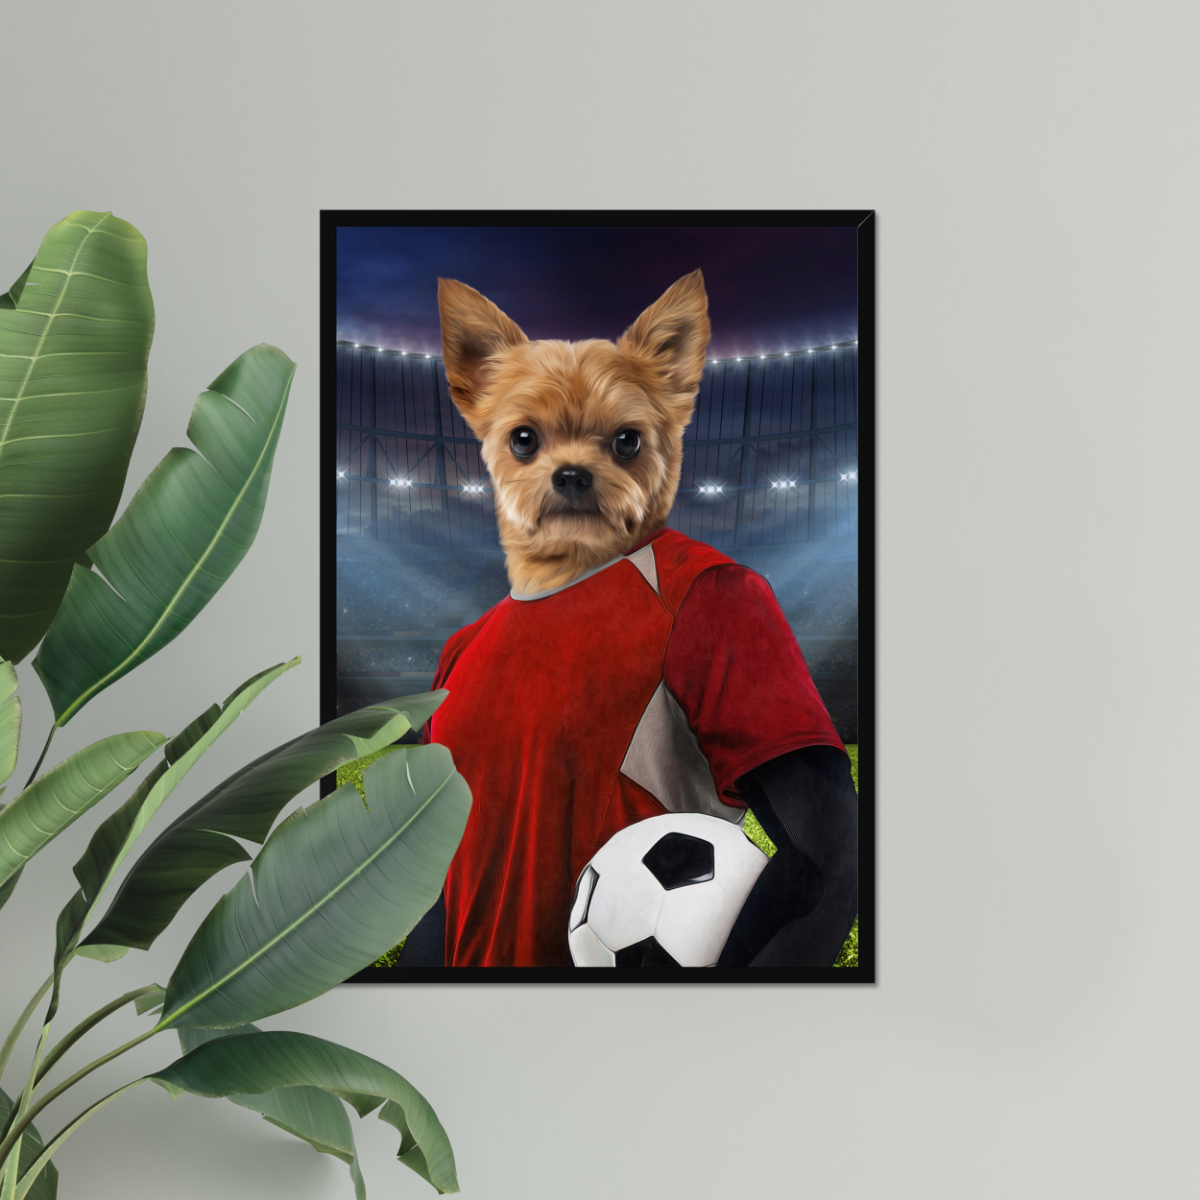 The Football Player: Custom Pet Portrait - Paw & Glory, paw and glory, aristocratic dog portraits, aristocrat dog painting, aristocratic dog portraits, dog portraits colorful, hogwarts dog houses, dog portrait images, pet portraits